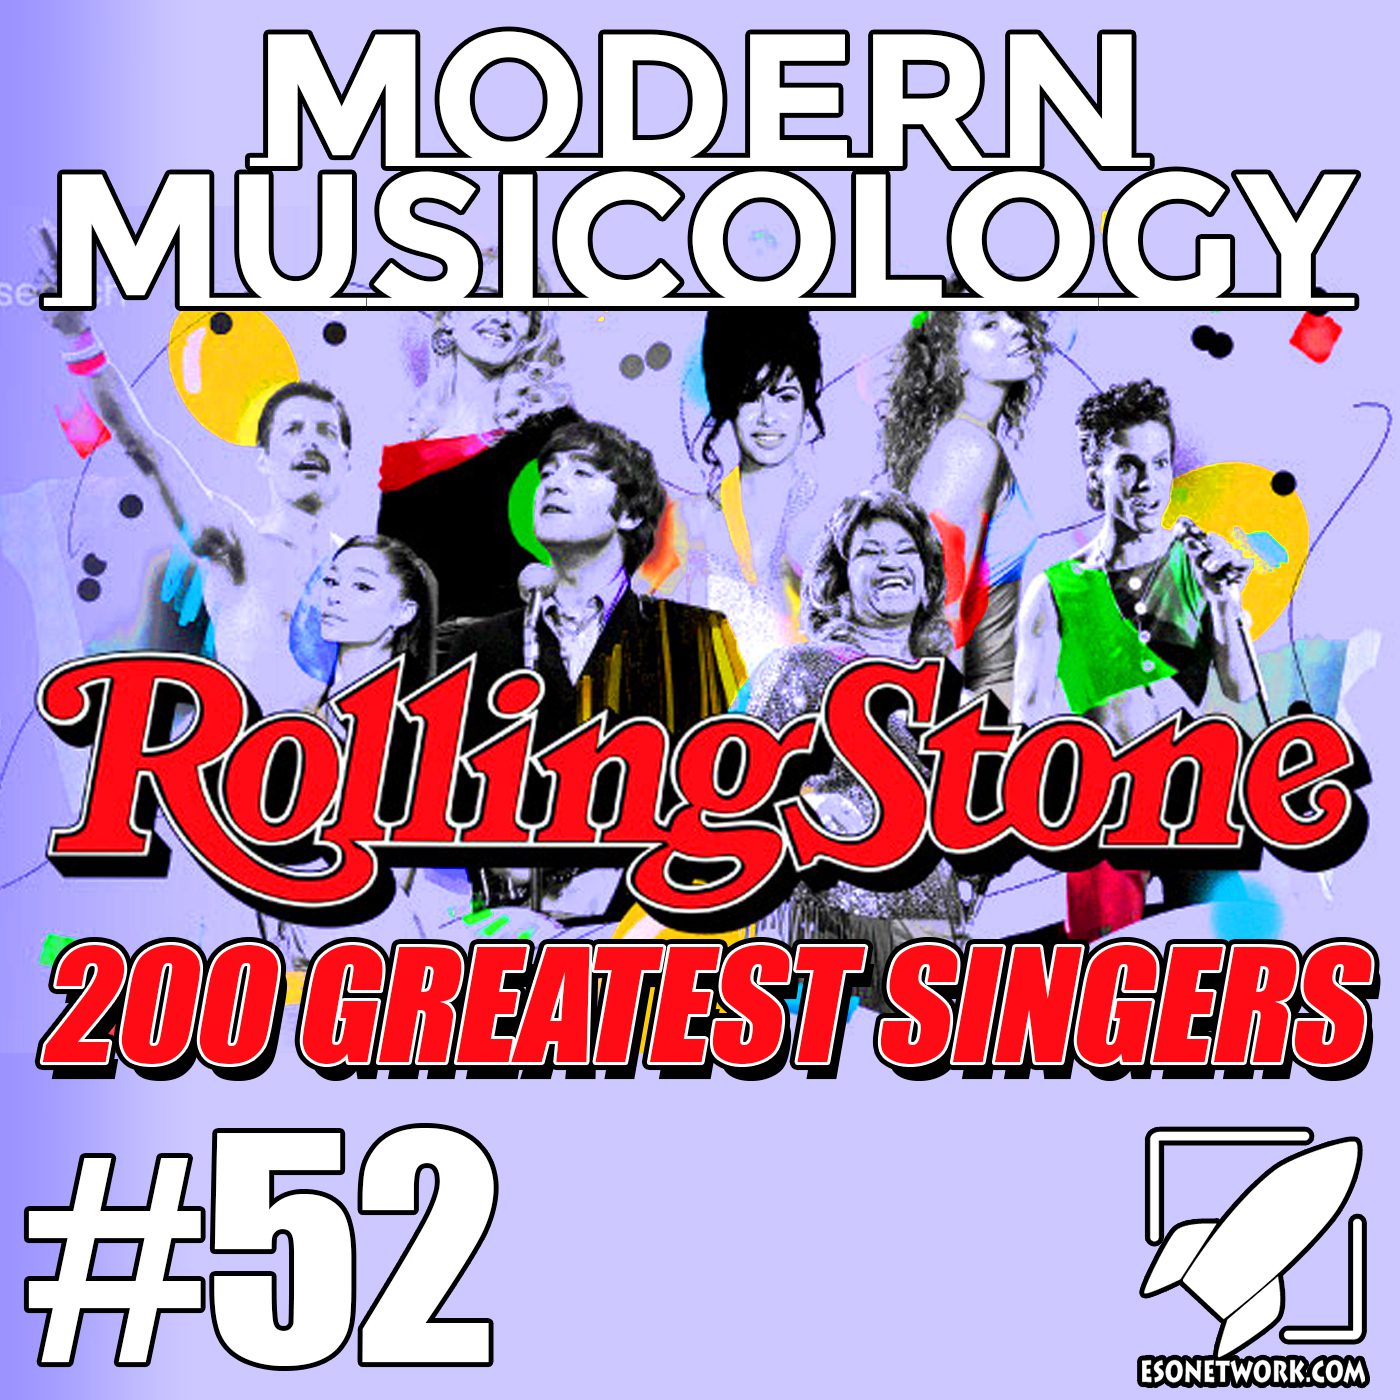 Modern Musicology #52 - Rolling Stone List of 200 Greatest Singers